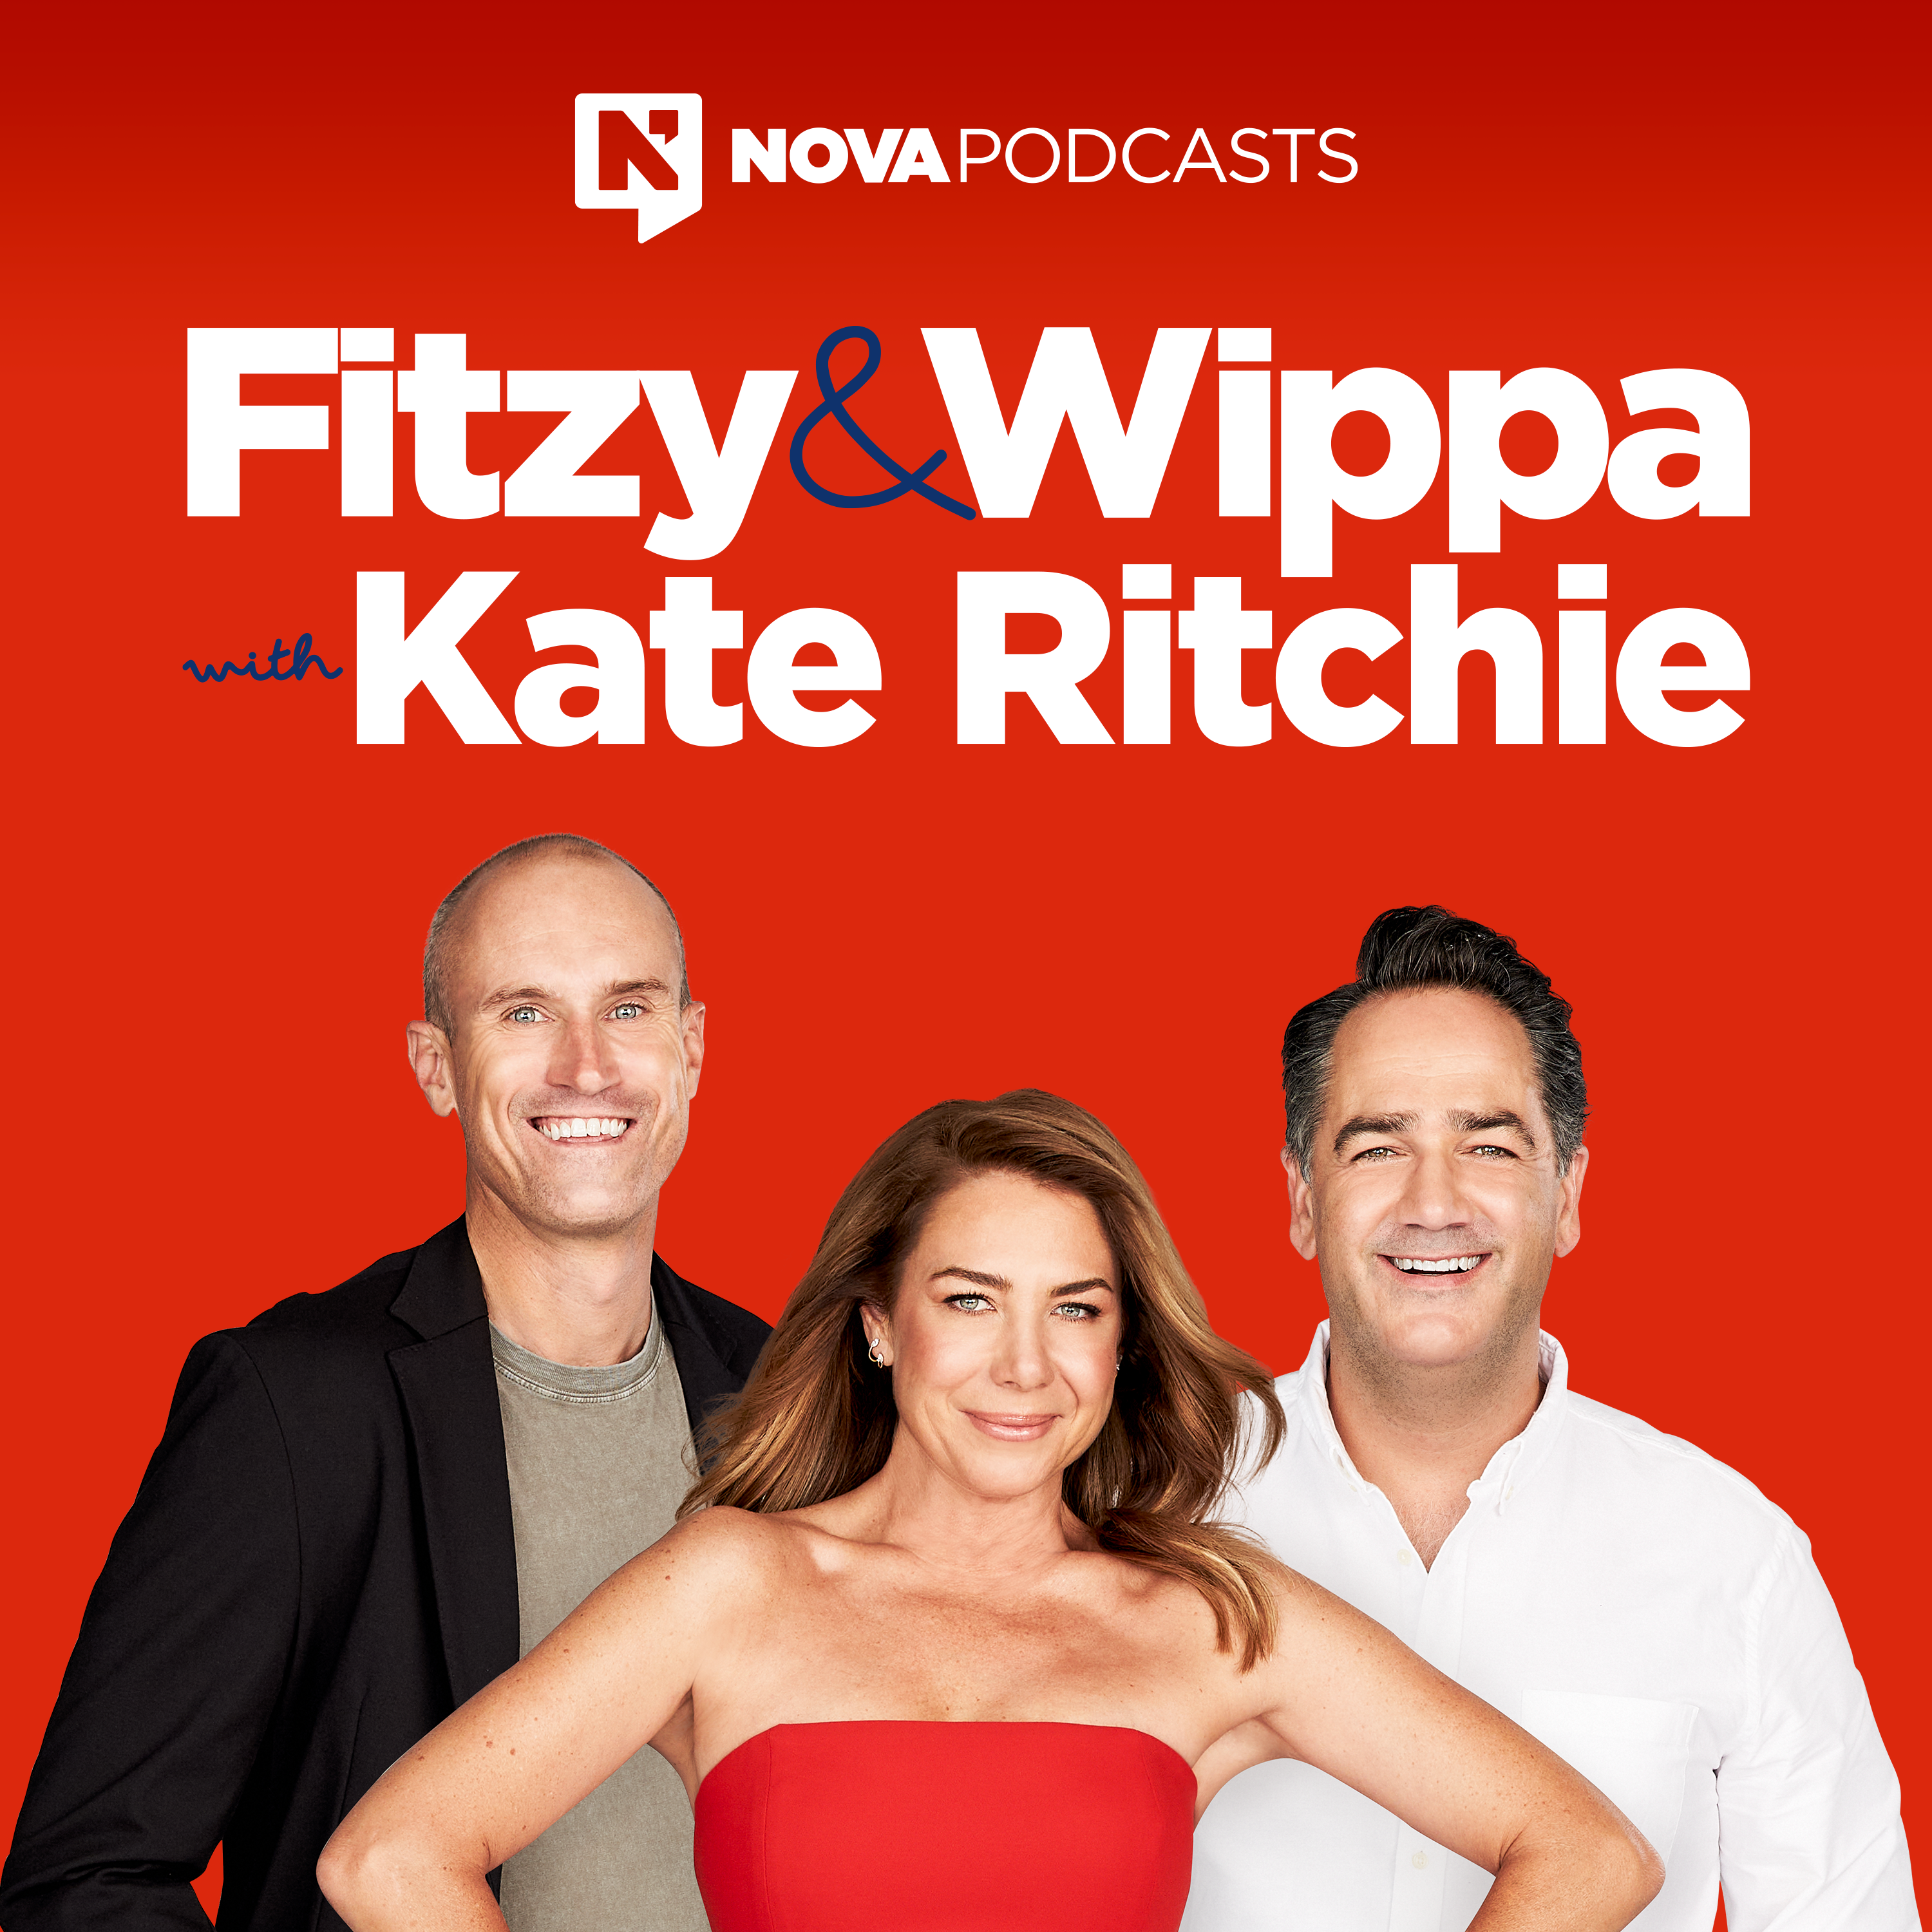 David Walliams Is Not Here To Promote Elton John (Best of Fitzy & Wippa)